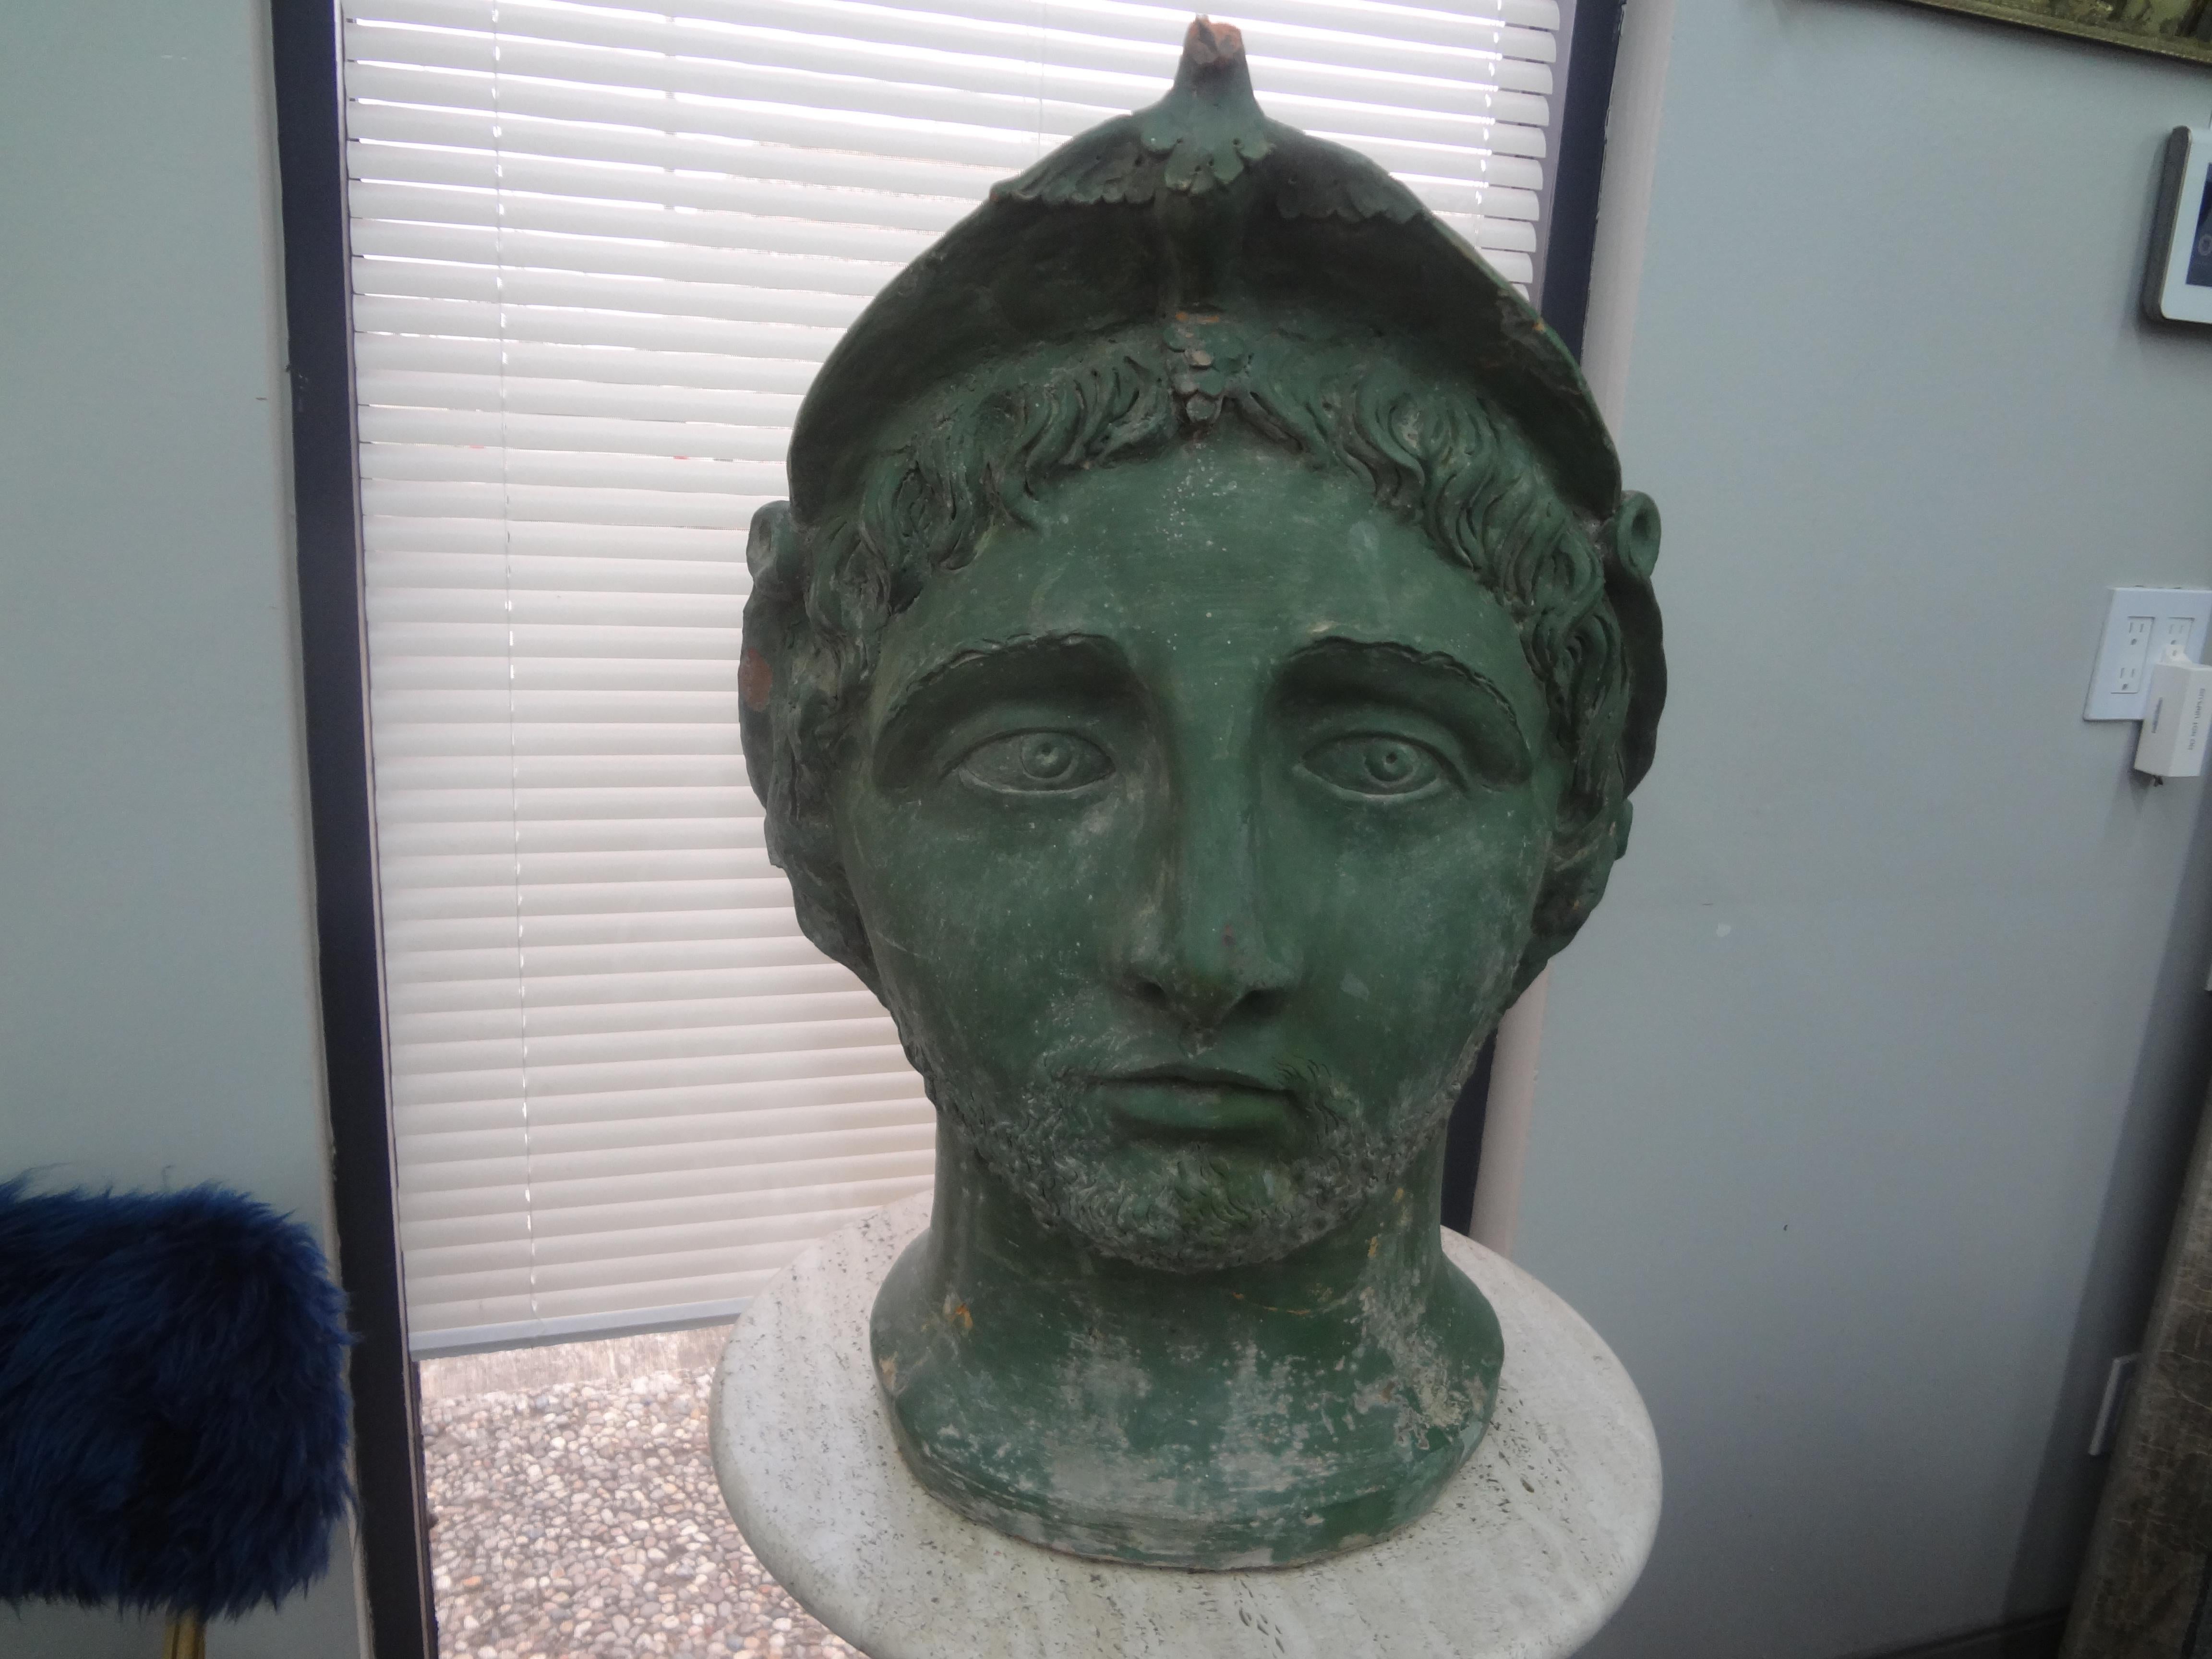 Monumental 19th century Italian patinated terracotta bust.
This stunning mid-19th century Italian terra cotta bust sculpture of a Classical Greek is patinated a lovely shade of green which resembles bronze.
Our statement bust would look great on a